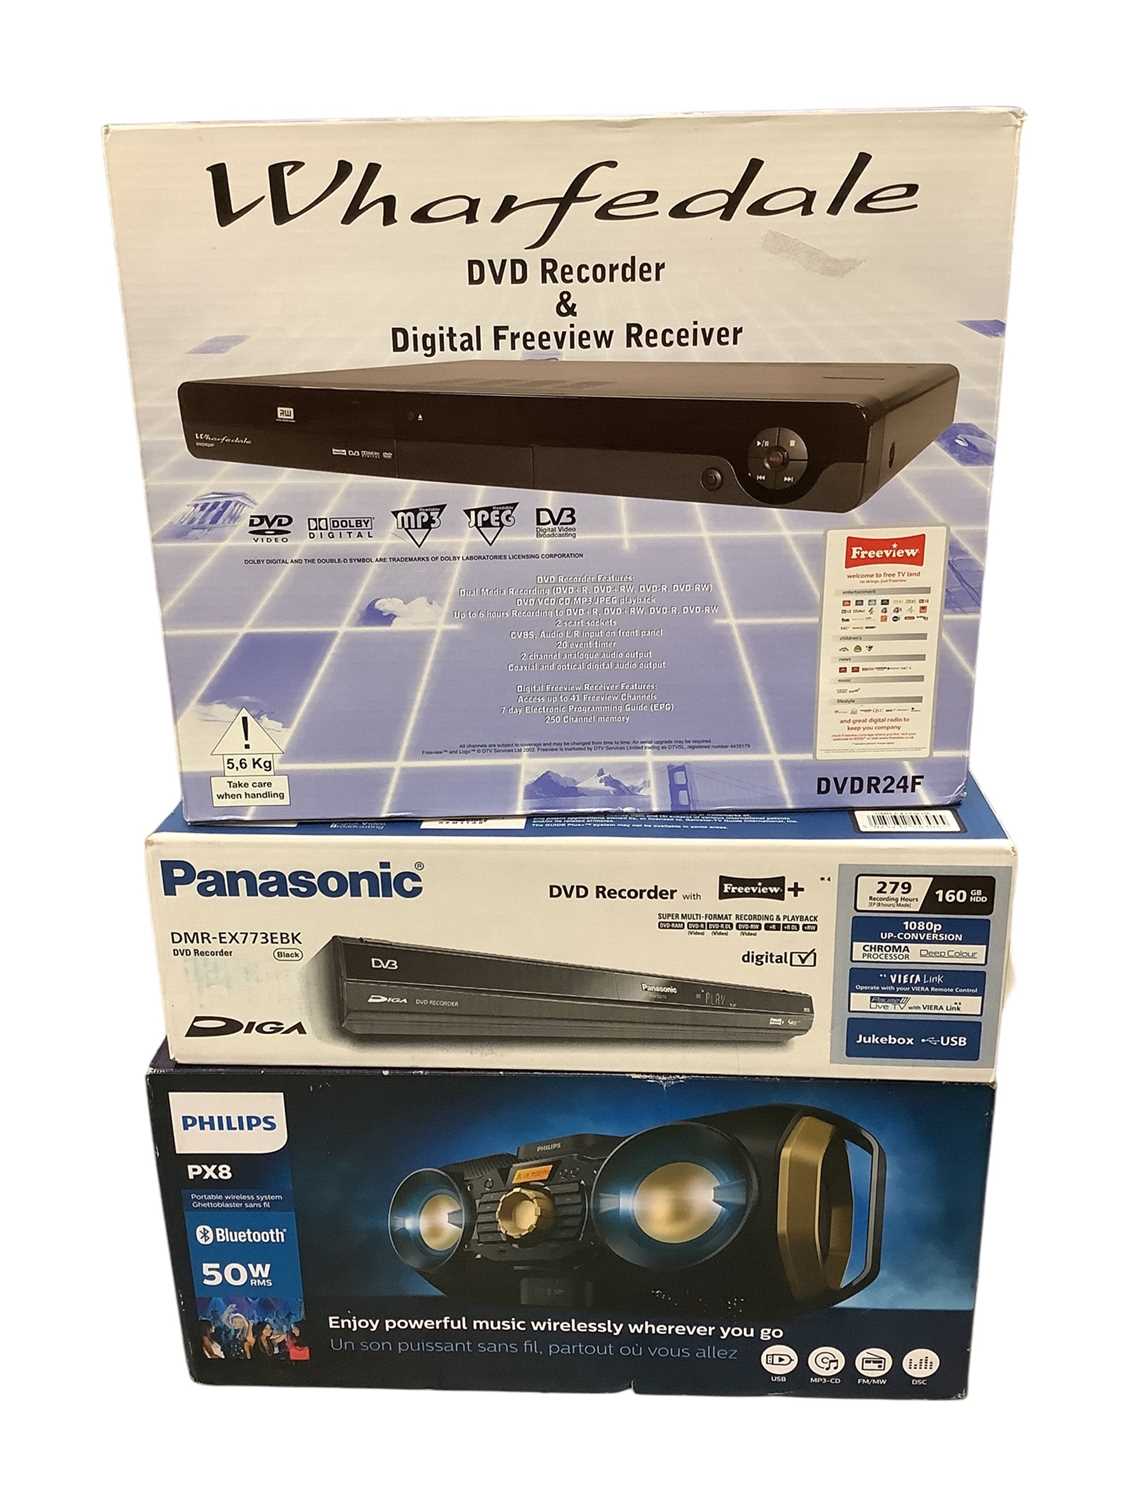 Lot 6 - Philips PX8 portable wireless speaker system together Panasonic DVD recorder with Freeview+ and a Wharfedale DVD Recorder & Digital free view receiver (3)